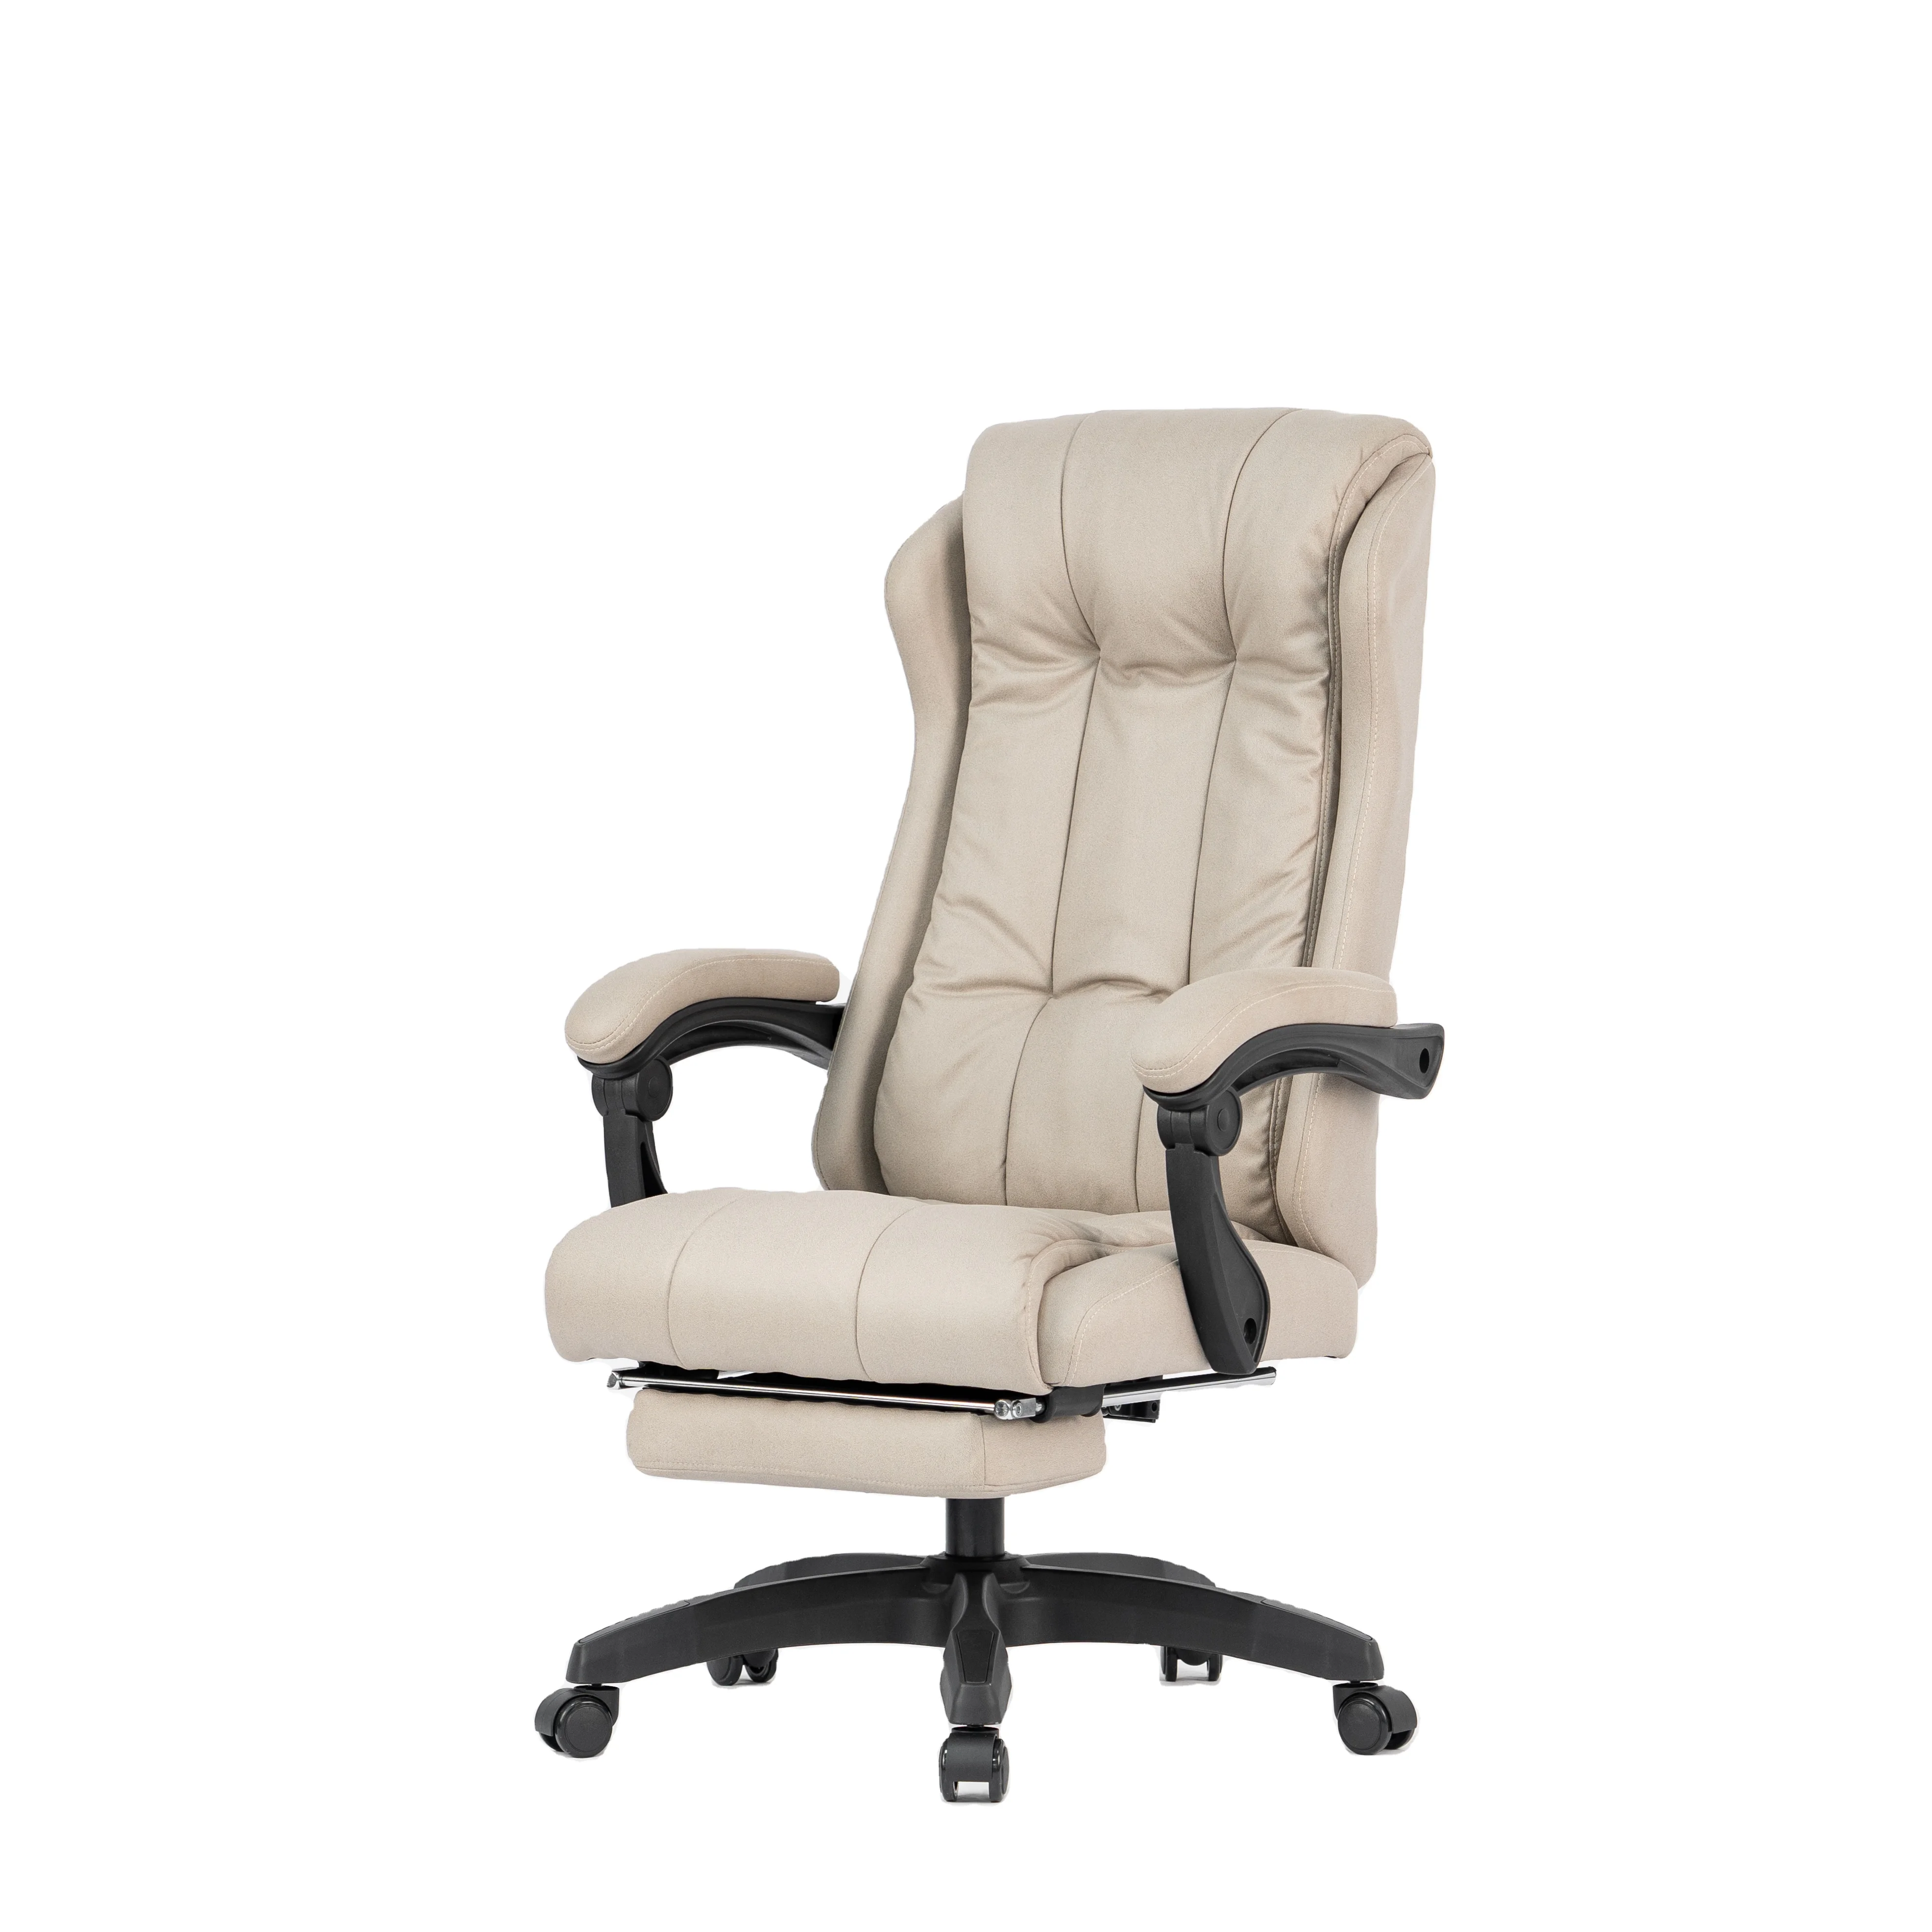 Professional Office Furniture Ergonomic Chair High Quality Manager Boss Office  Chair - Buy Boss Offfice Chair,Office Chair Boss,Ergonomic Chair High  Quality Boss Chair Product on 